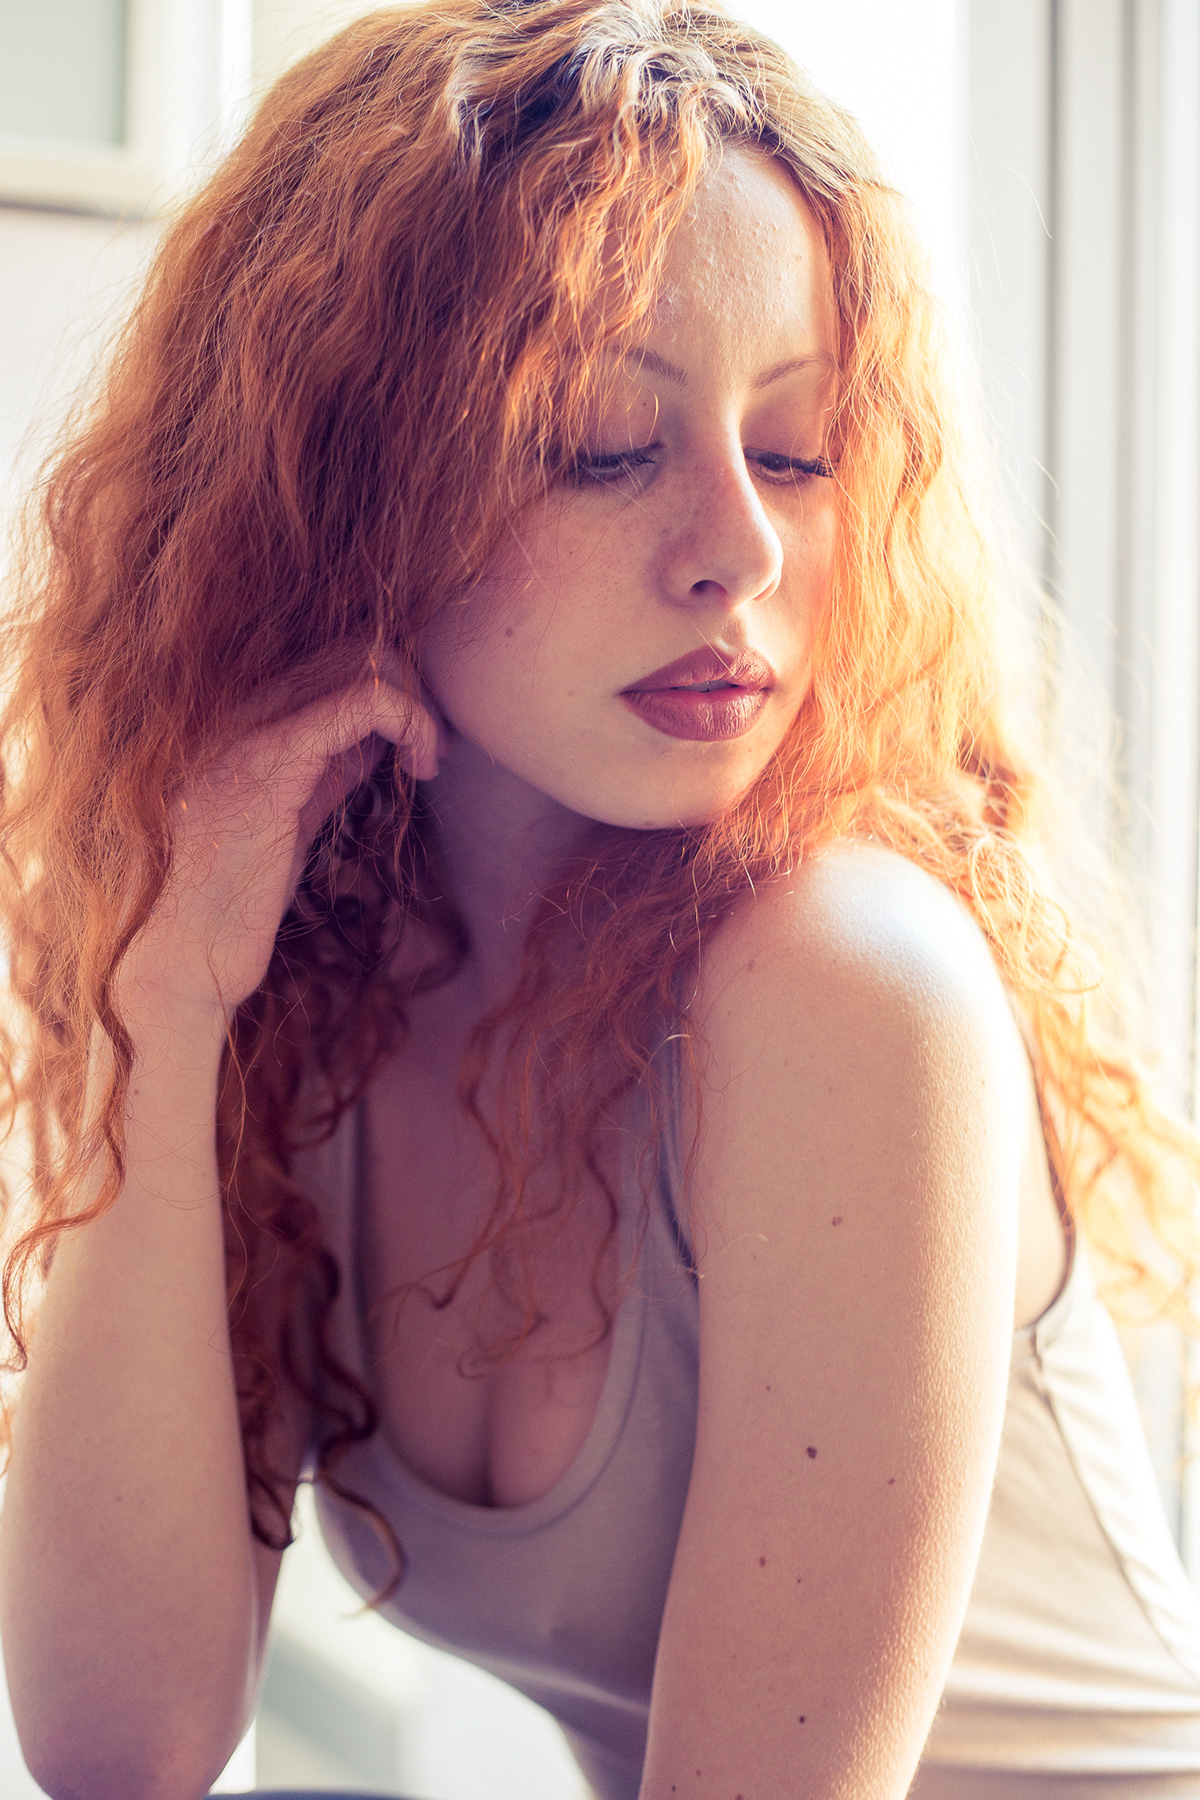 redhead beauty woman light Ambient model soft freckles orange natural photo hair photoshoot